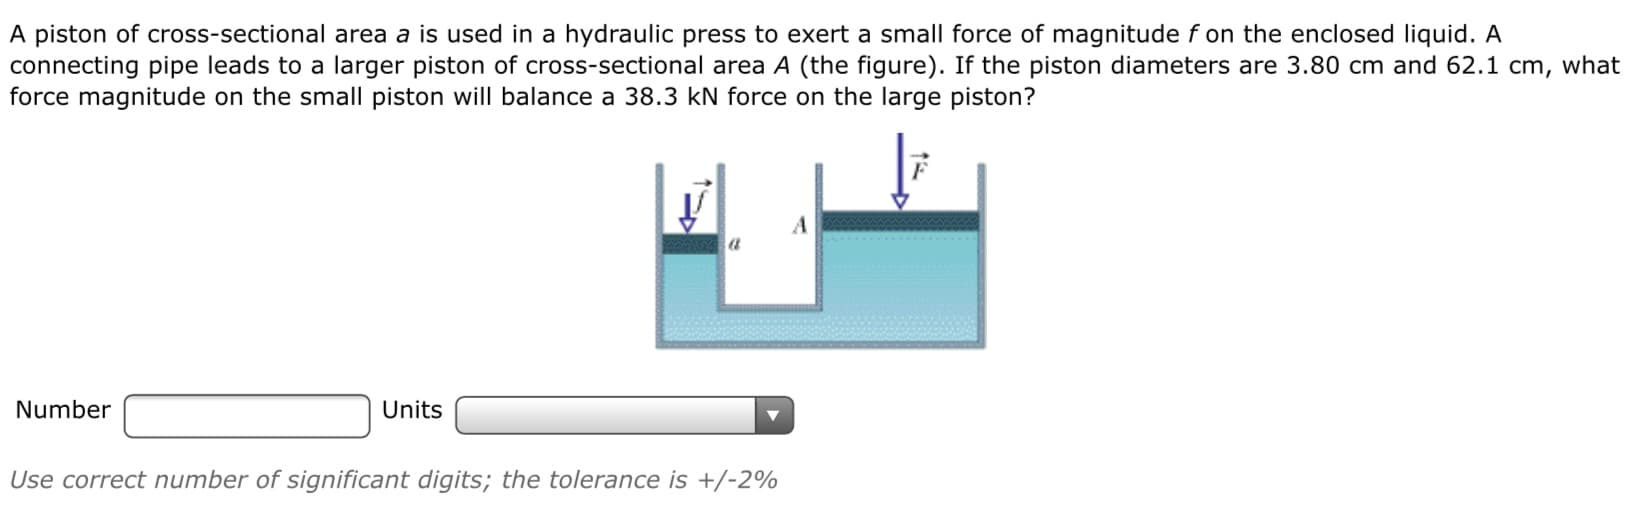 A piston of cross-sectional area a is used in a hydraulic press to exert a small force of magnitude f on the enclosed liquid. A
connecting pipe leads to a larger piston of cross-sectional area A (the figure). If the piston diameters are 3.80 cm and 62.1 cm, what
force magnitude on the small piston will balance a 38.3 kN force on the large piston?
Number
Units
Use correct number of significant digits; the tolerance is +/-2%
